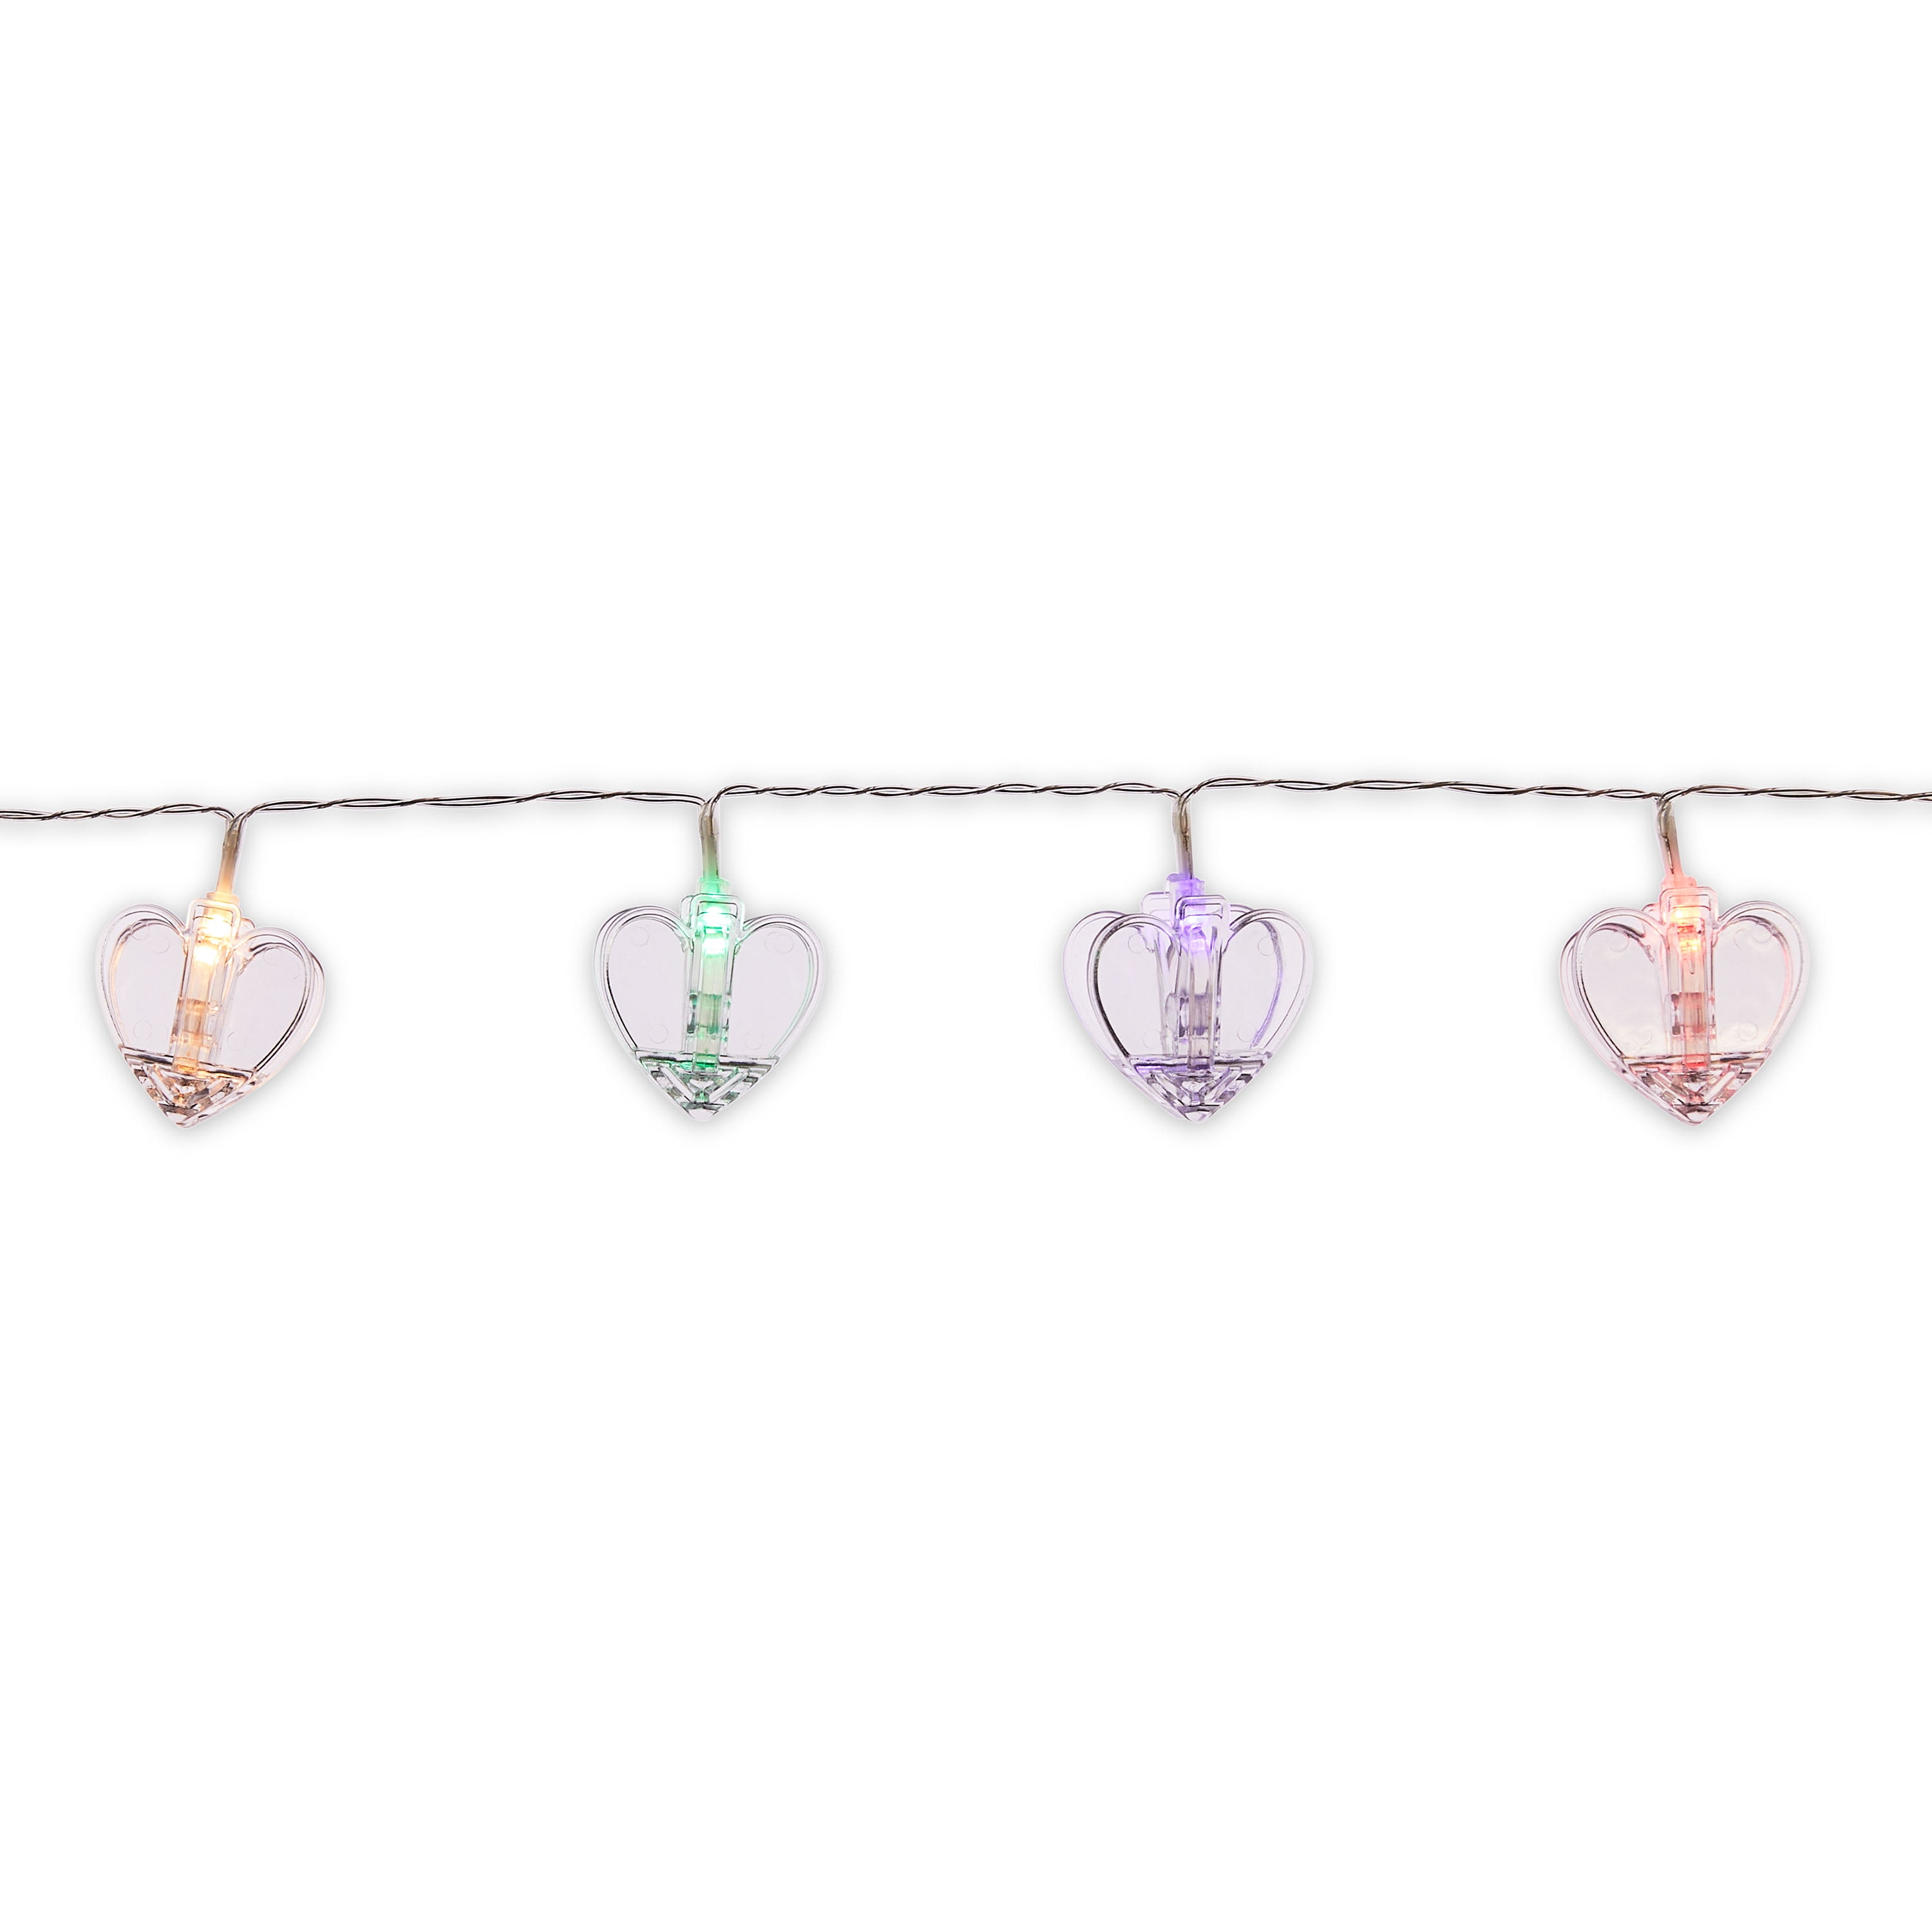 WAY TO CELEBRATE! Way to Celebrate Heart Clip For Indoor Use 10 LED Decorative String Lights Multi Color